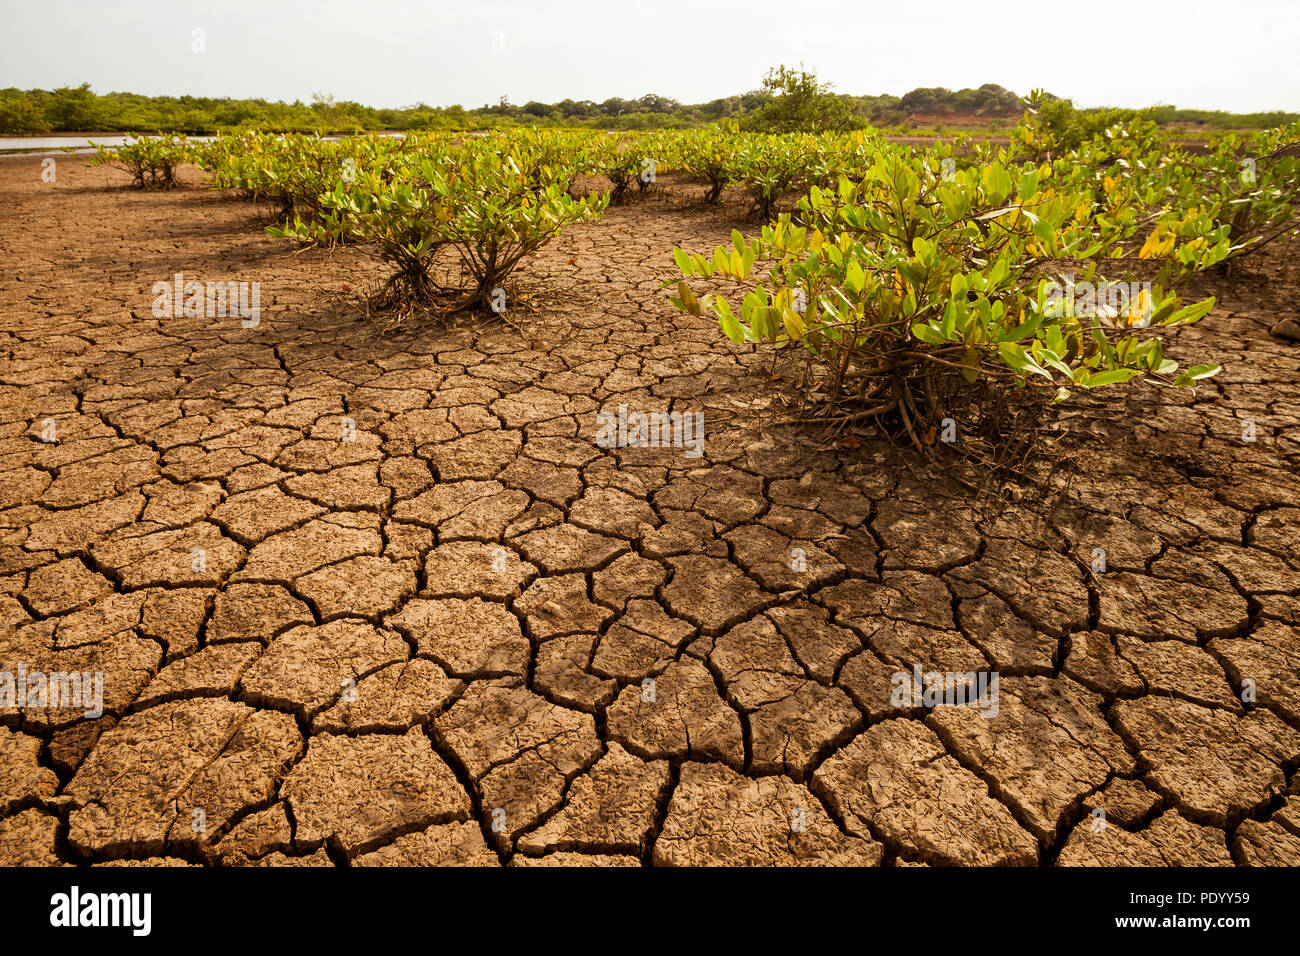 Panama landscape with cracked soil and vegetation in the desert of Sarigua national park, Herrera province, Republic of Panama, Central America. Stock Photo